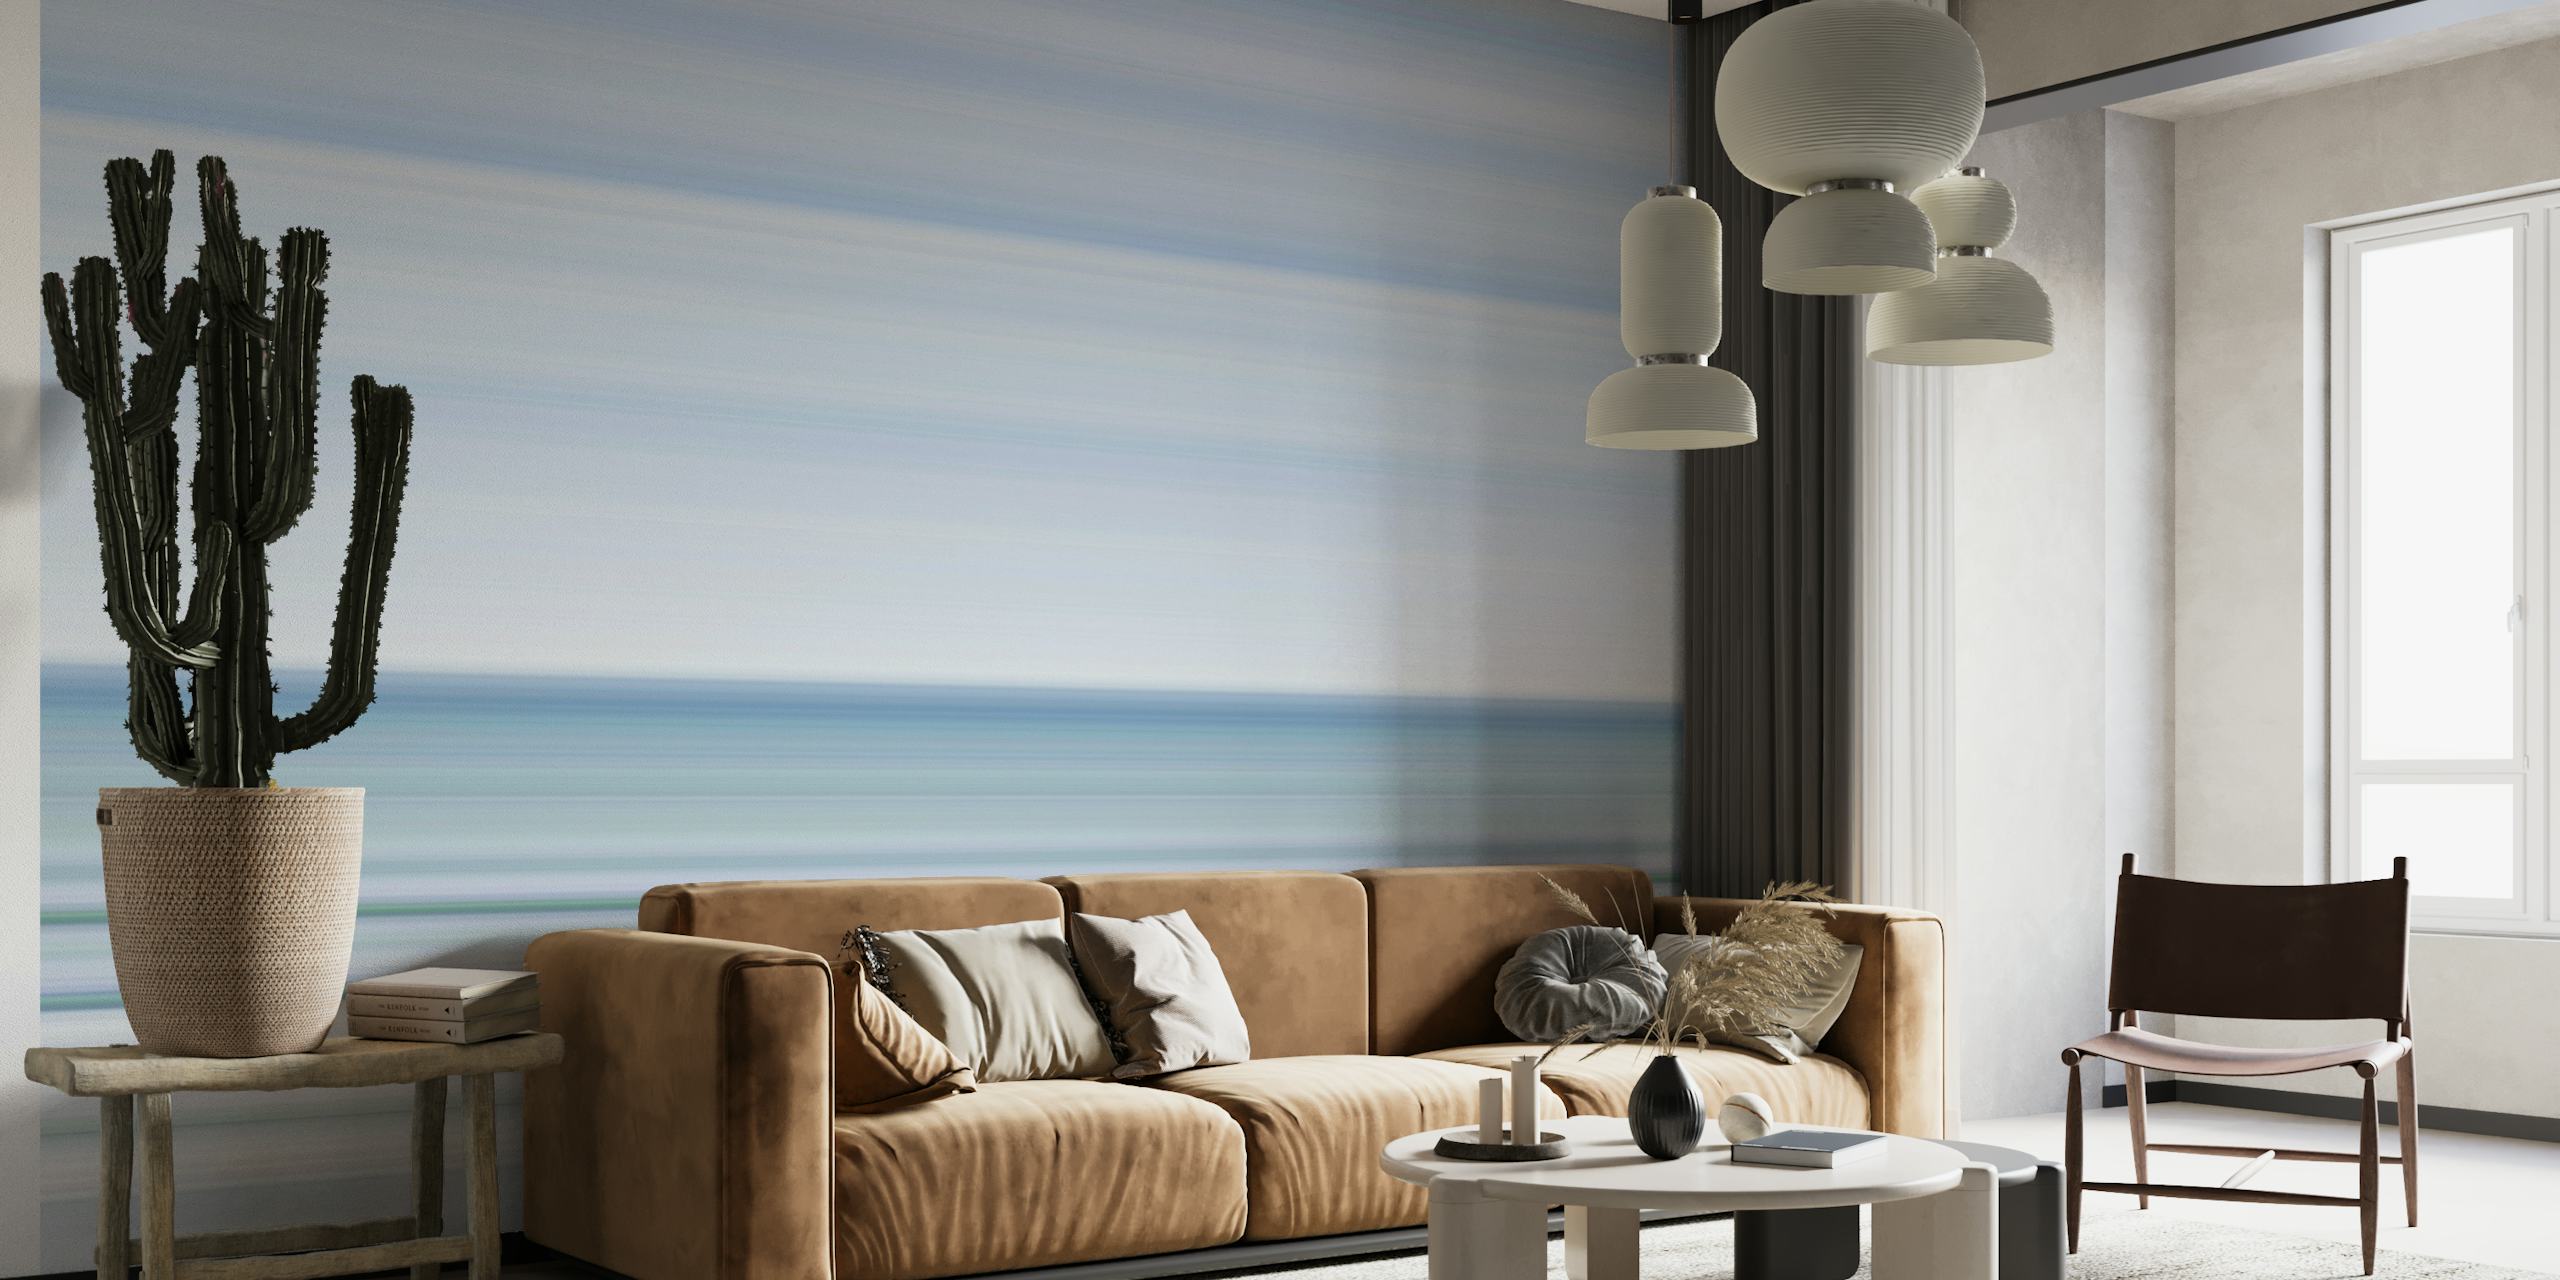 Linje Havs wall mural featuring serene blue and white horizontal lines